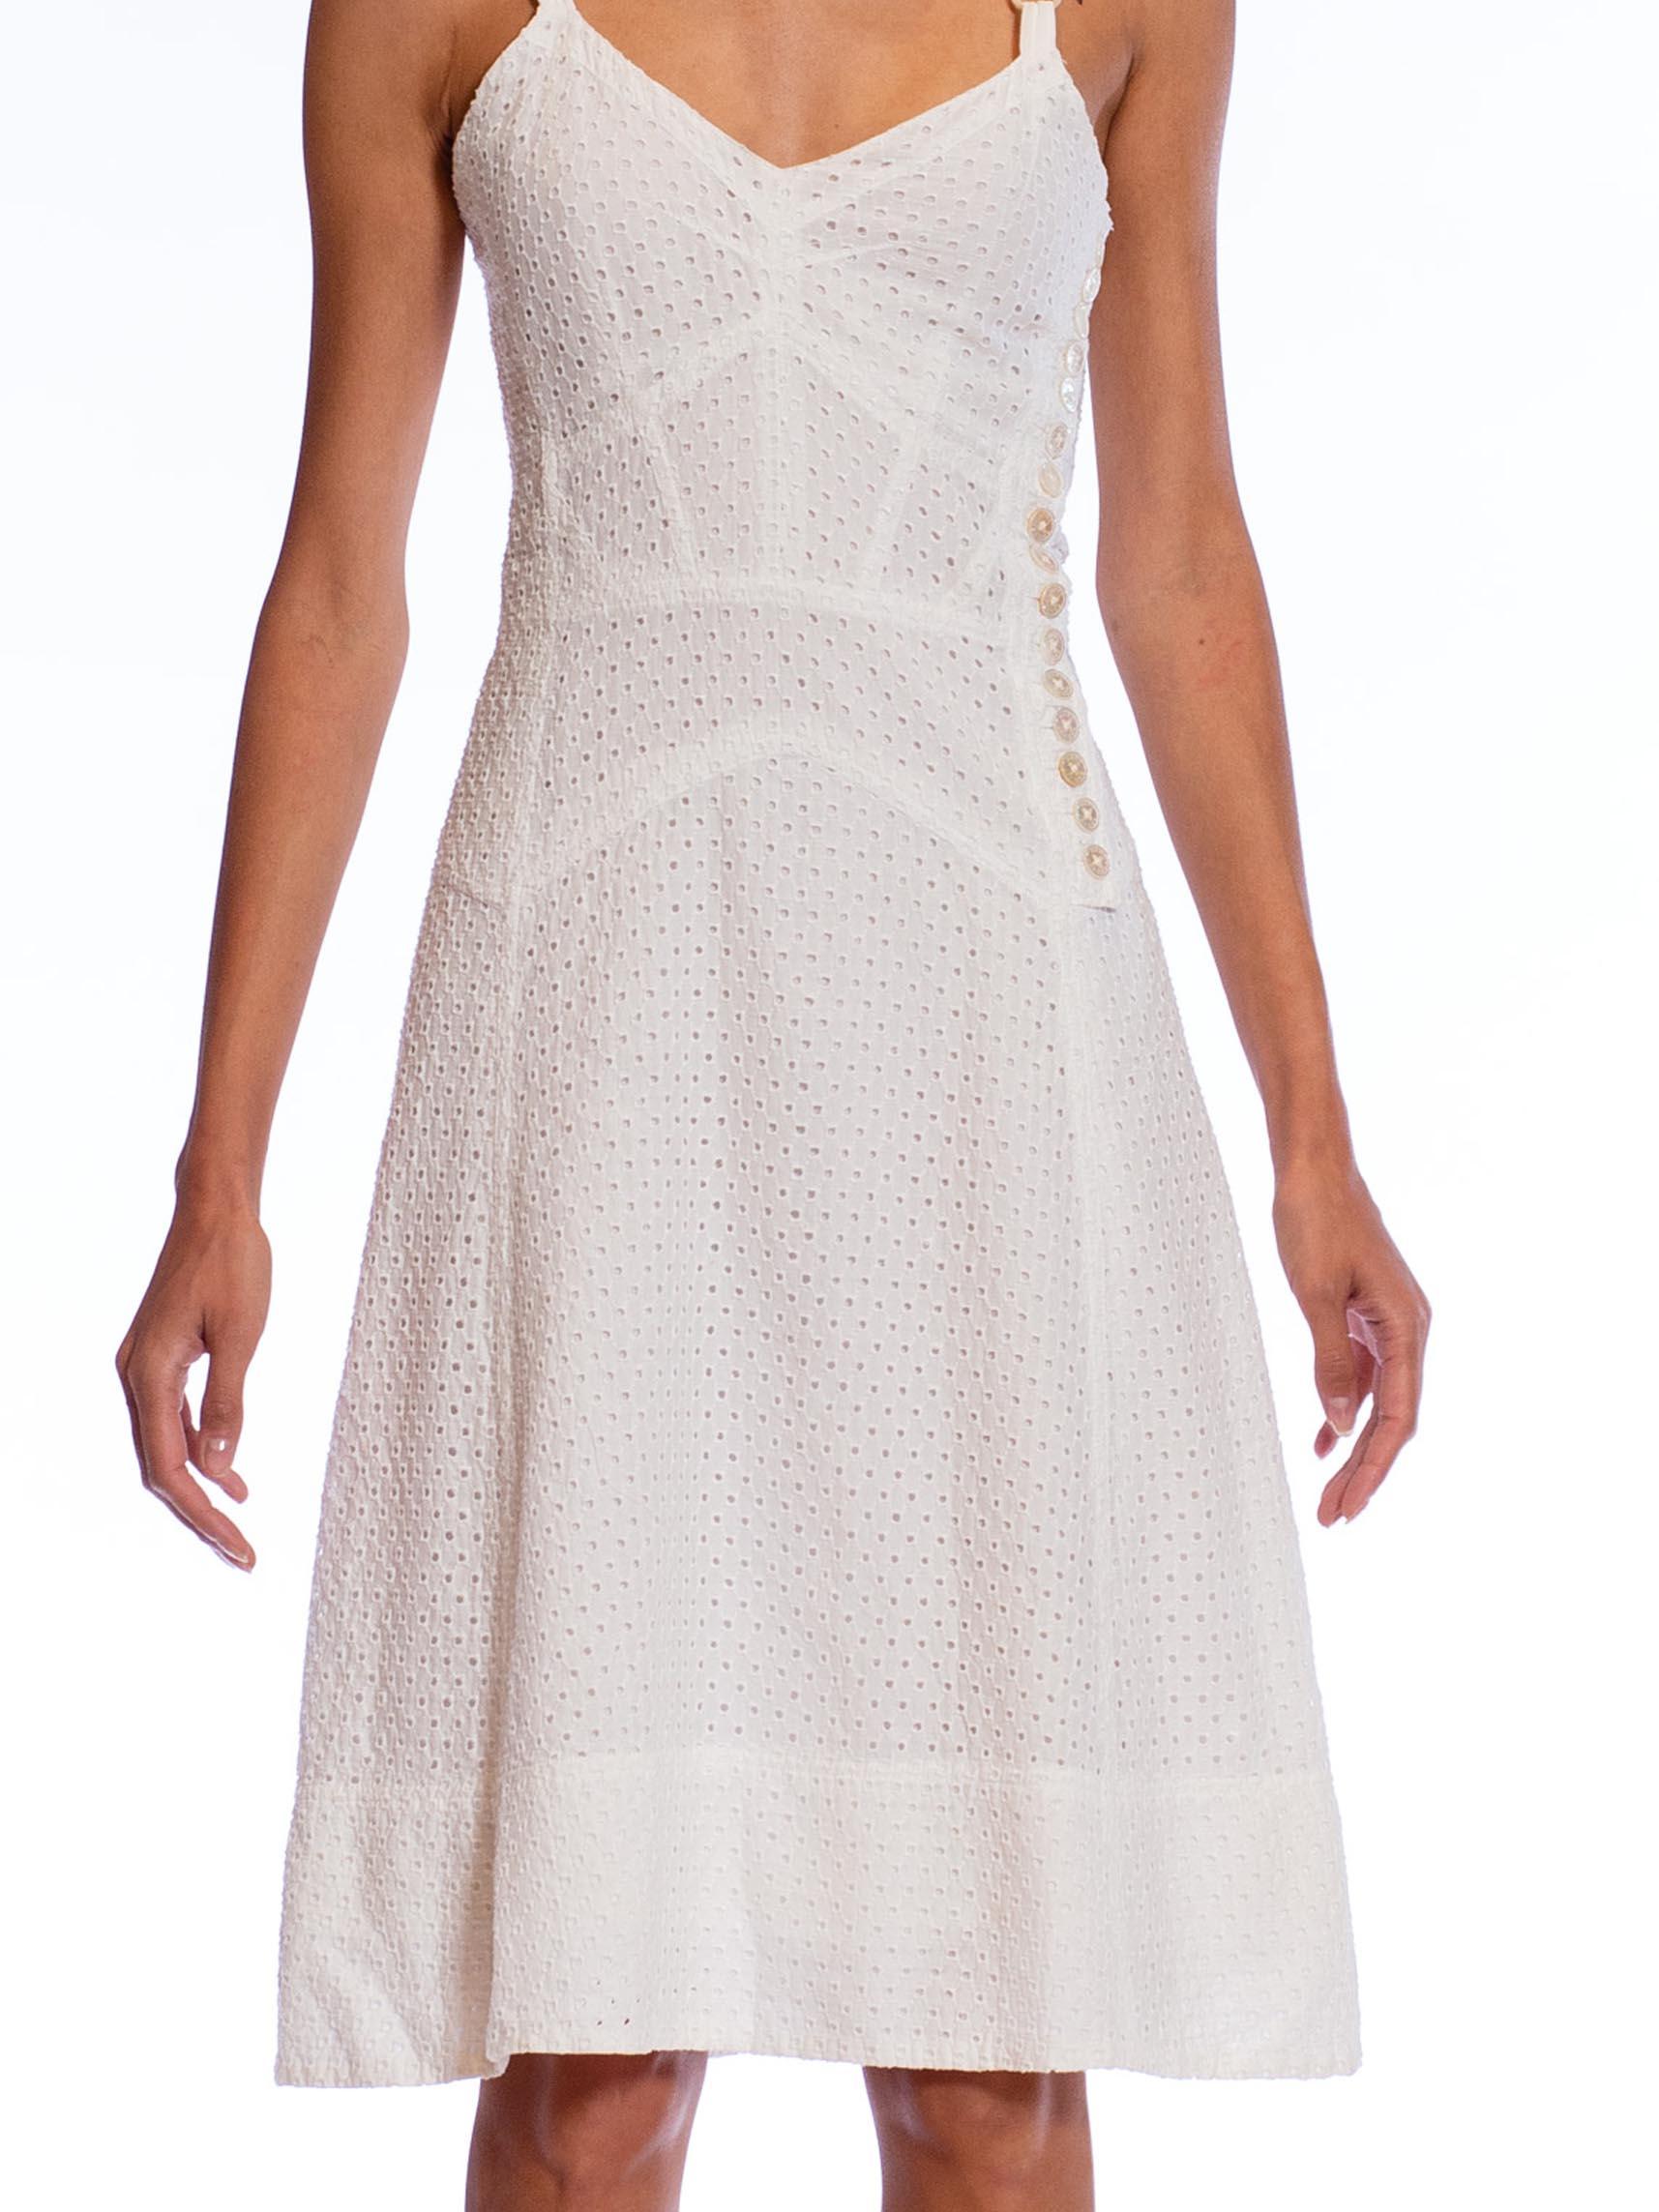 2000S MARC JACOBS White Cotton Eyelet Lace Summer Dress For Sale 3